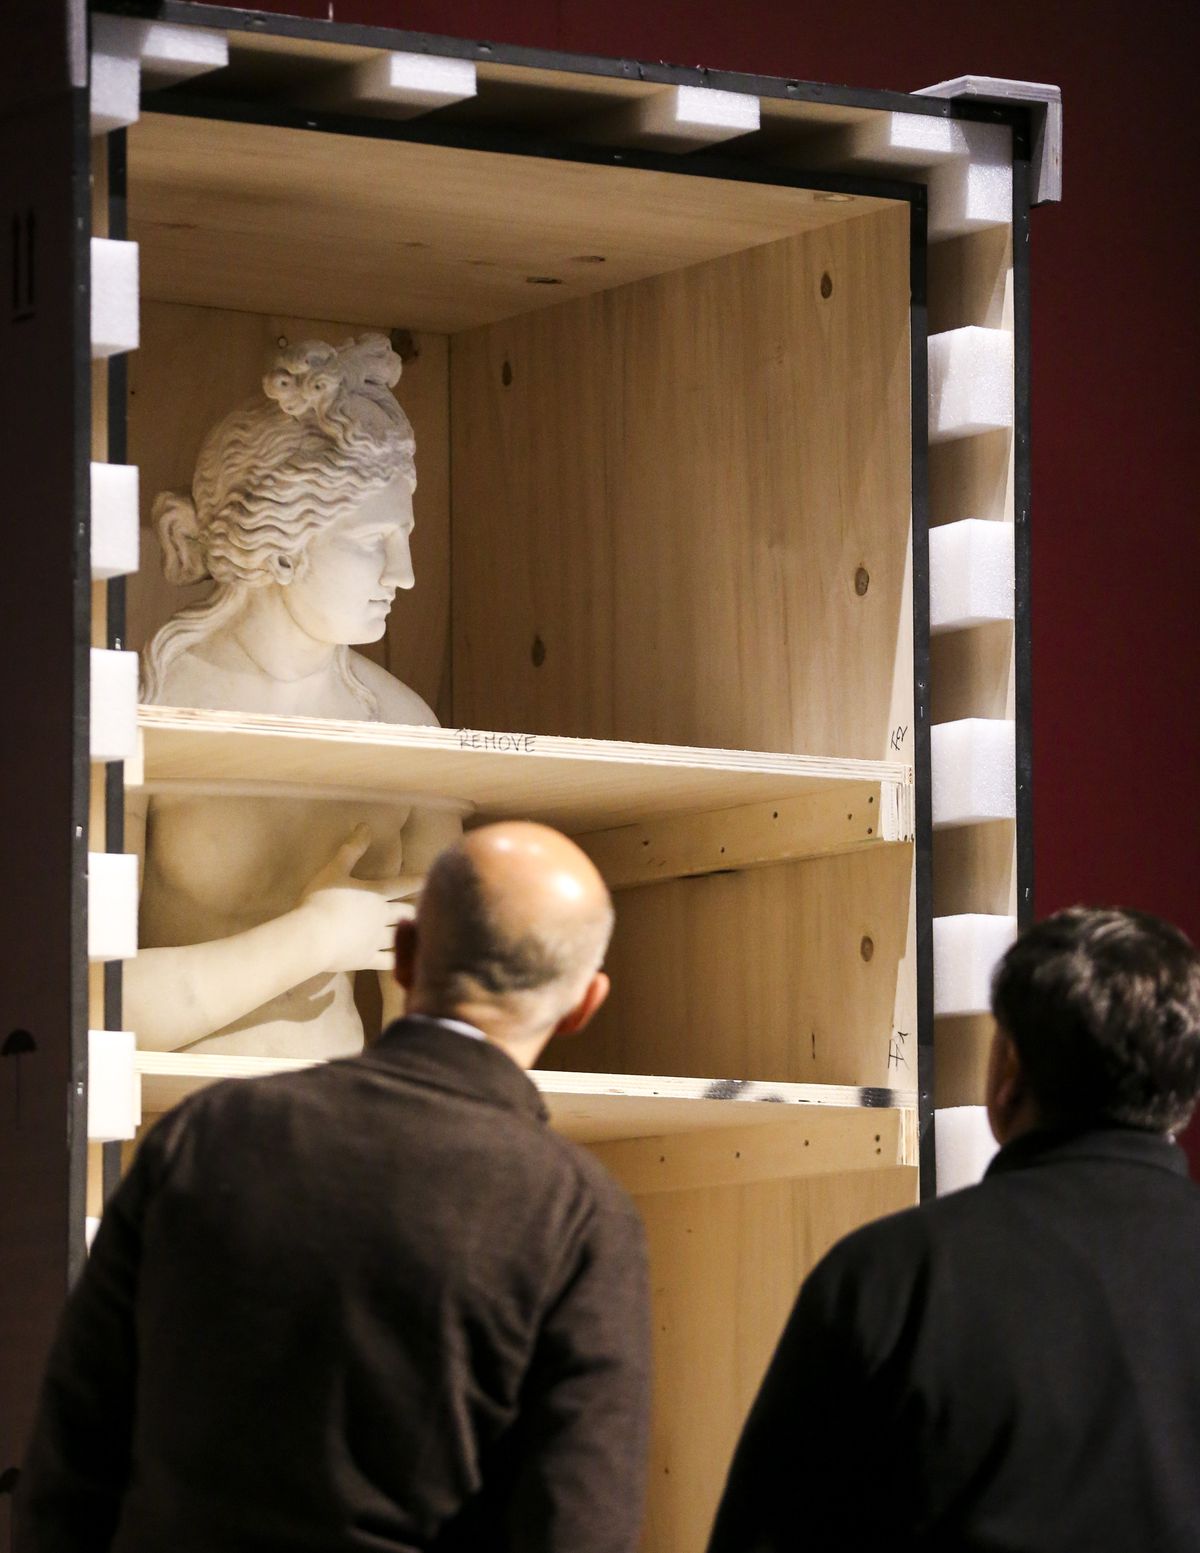 Pasquale Festinese, left, and Ciro Spina with the Museo Archeologico Nazionale Di Napoli in Italy, inspect the statue of Aphrodite for shipping damage after unboxing it as crews set up the traveling Pompeii exhibit at The Leonardo Museum in Salt Lake City on Monday, Nov. 18, 2019.